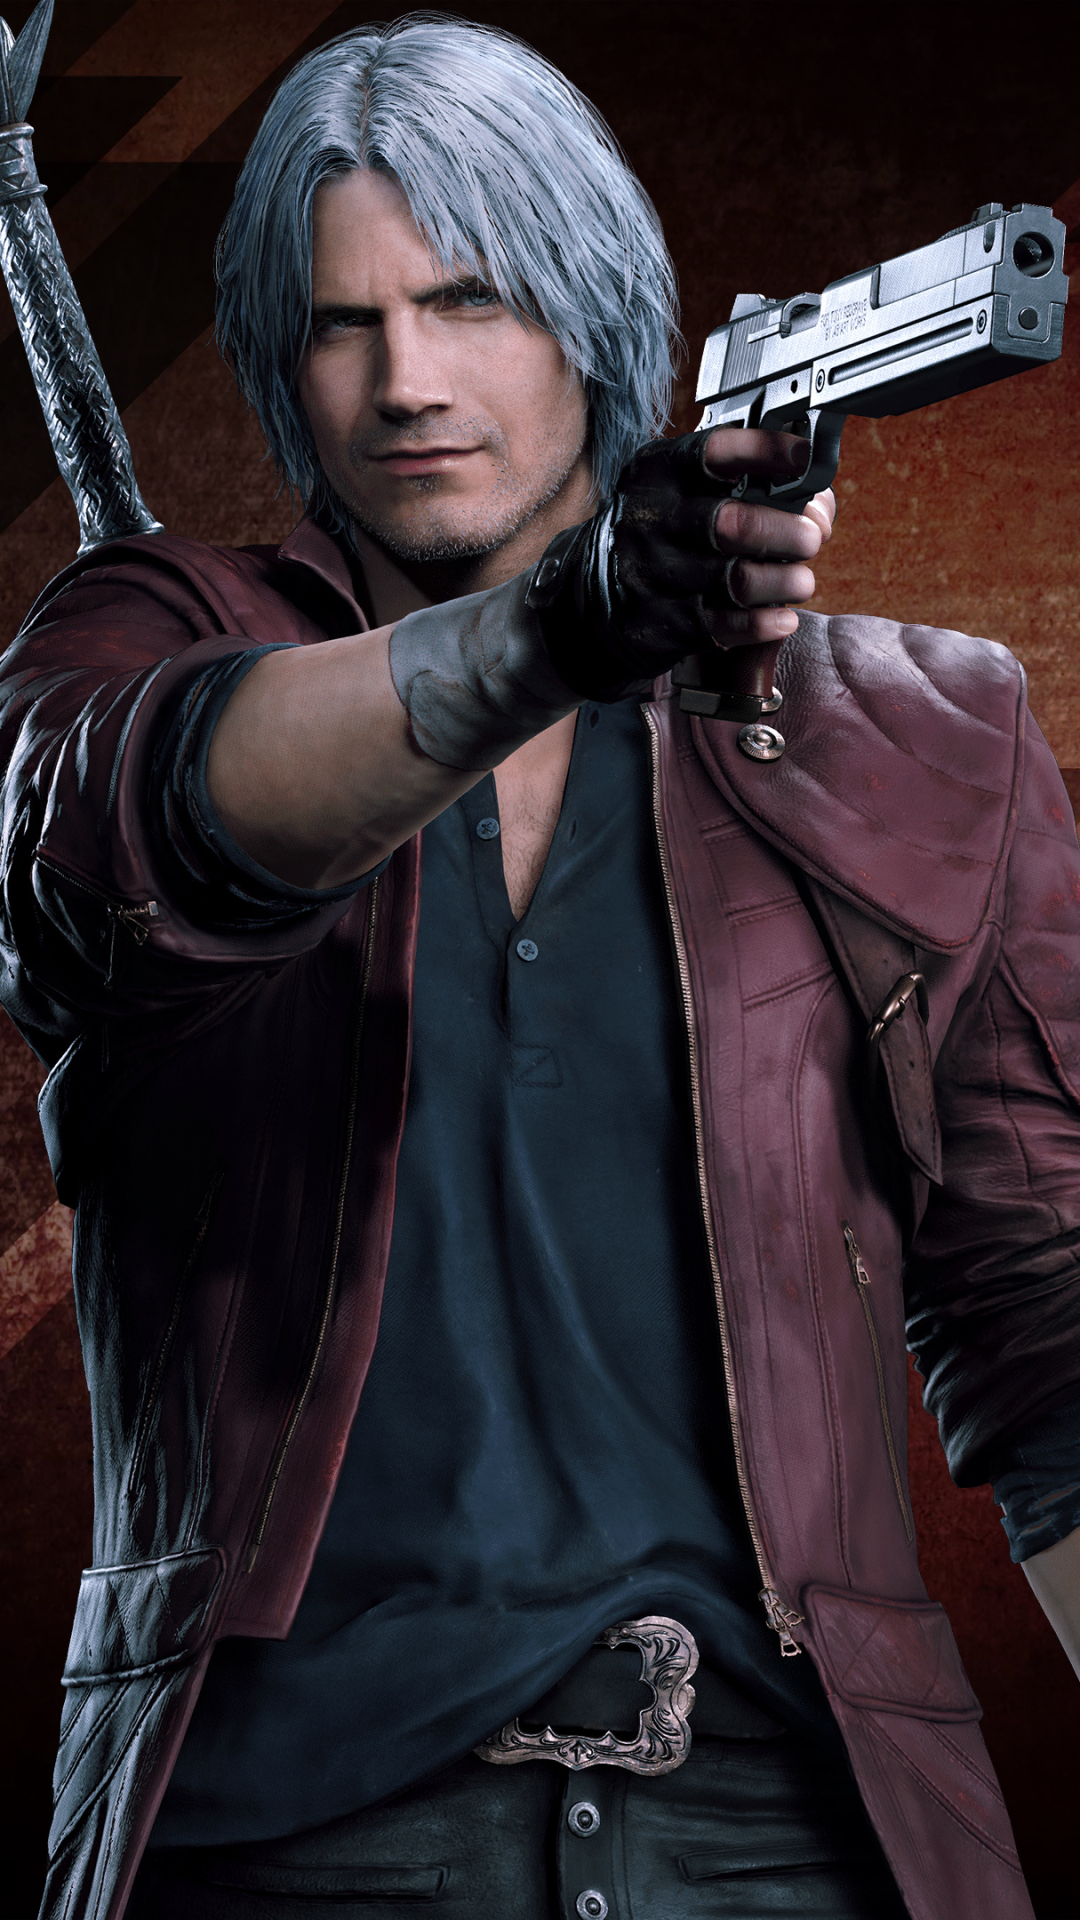 2018, video game, Dante, Devil May Cry5, fire, 1080x1920 wallpaper